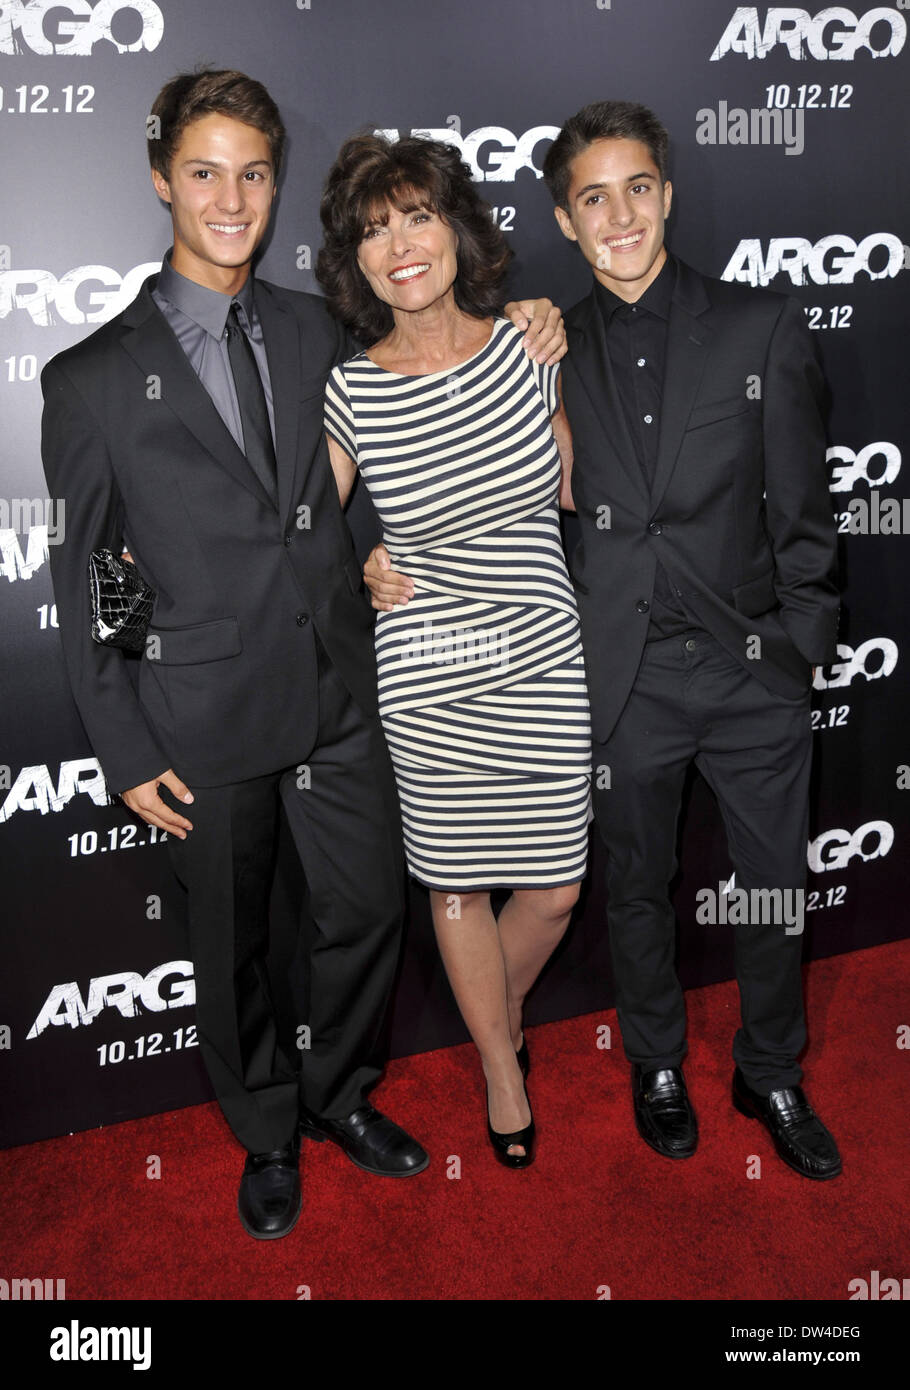 Adrienne Barbeau and sons arrives at the 'Argo' - Los Angeles Premiere at AMPAS Samuel Goldwyn Theater Beverly Hills Los Angeles, California - 04.10.12 Featuring: Adrienne Barbeau and sons Where: CA, United States When: 04 Oct 2012 Stock Photo